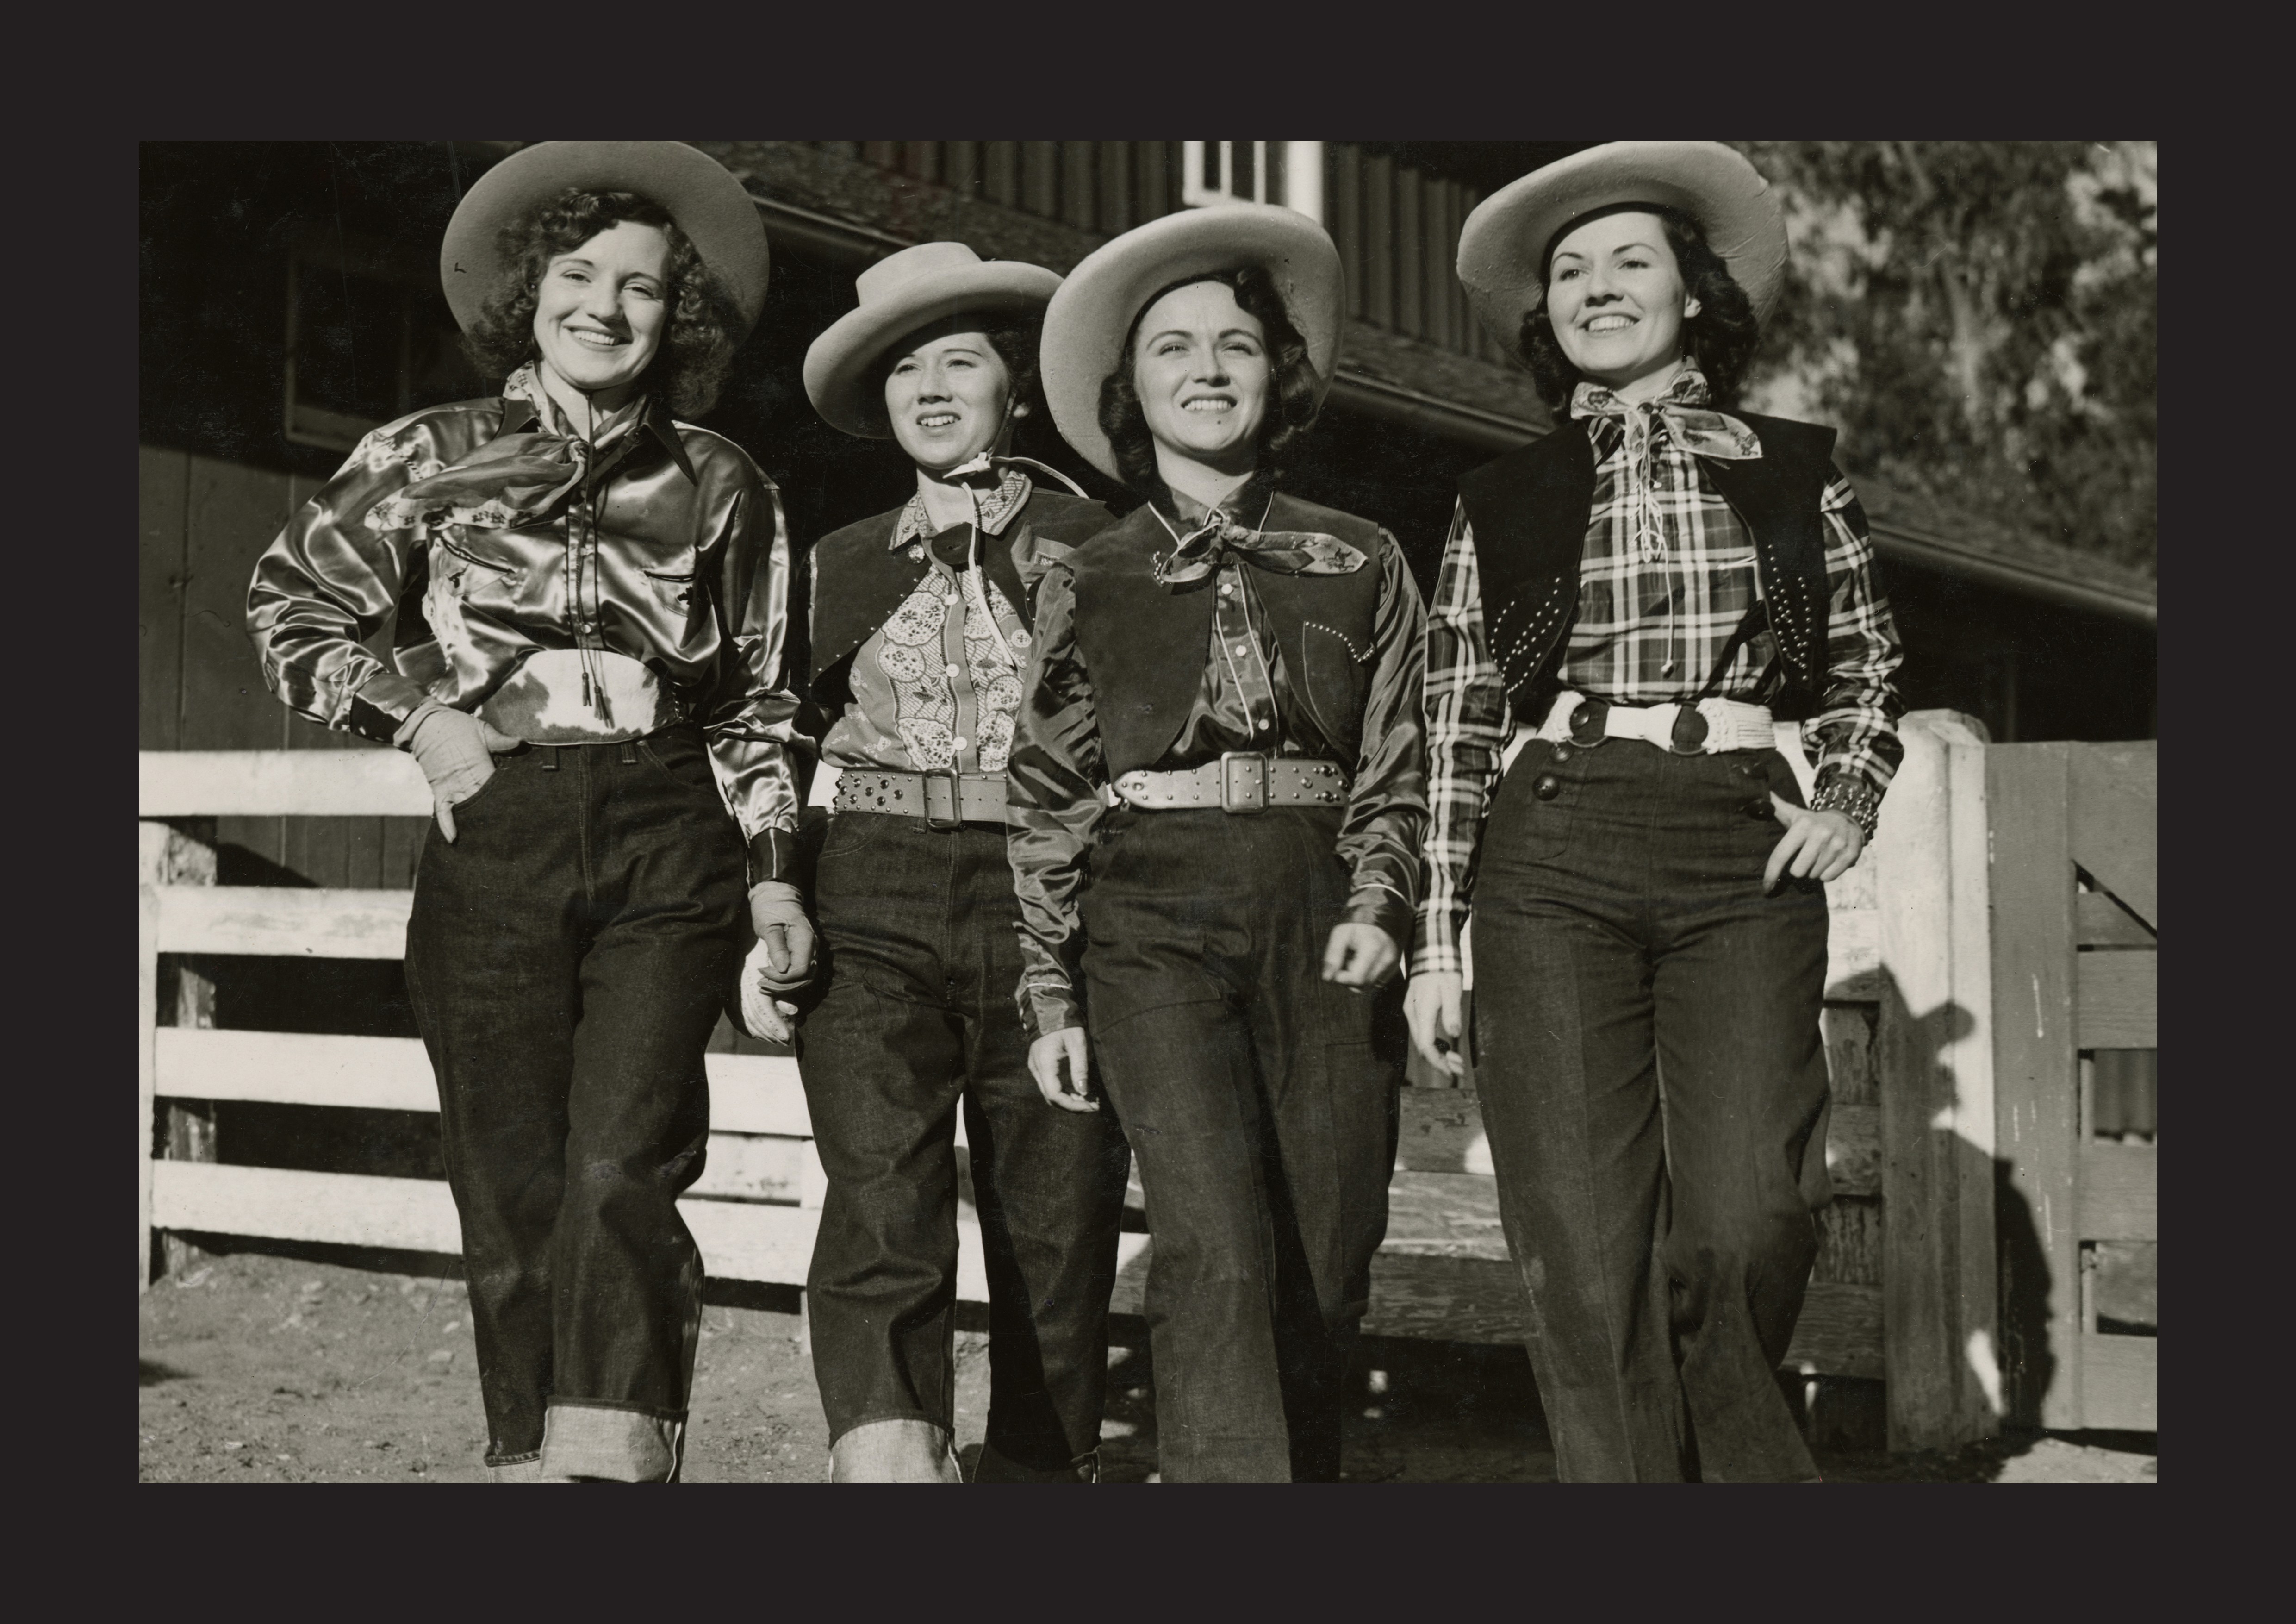 Levi Strauss & Co Celebrates The 80th Anniversary Of Women's Levi’s Jeans